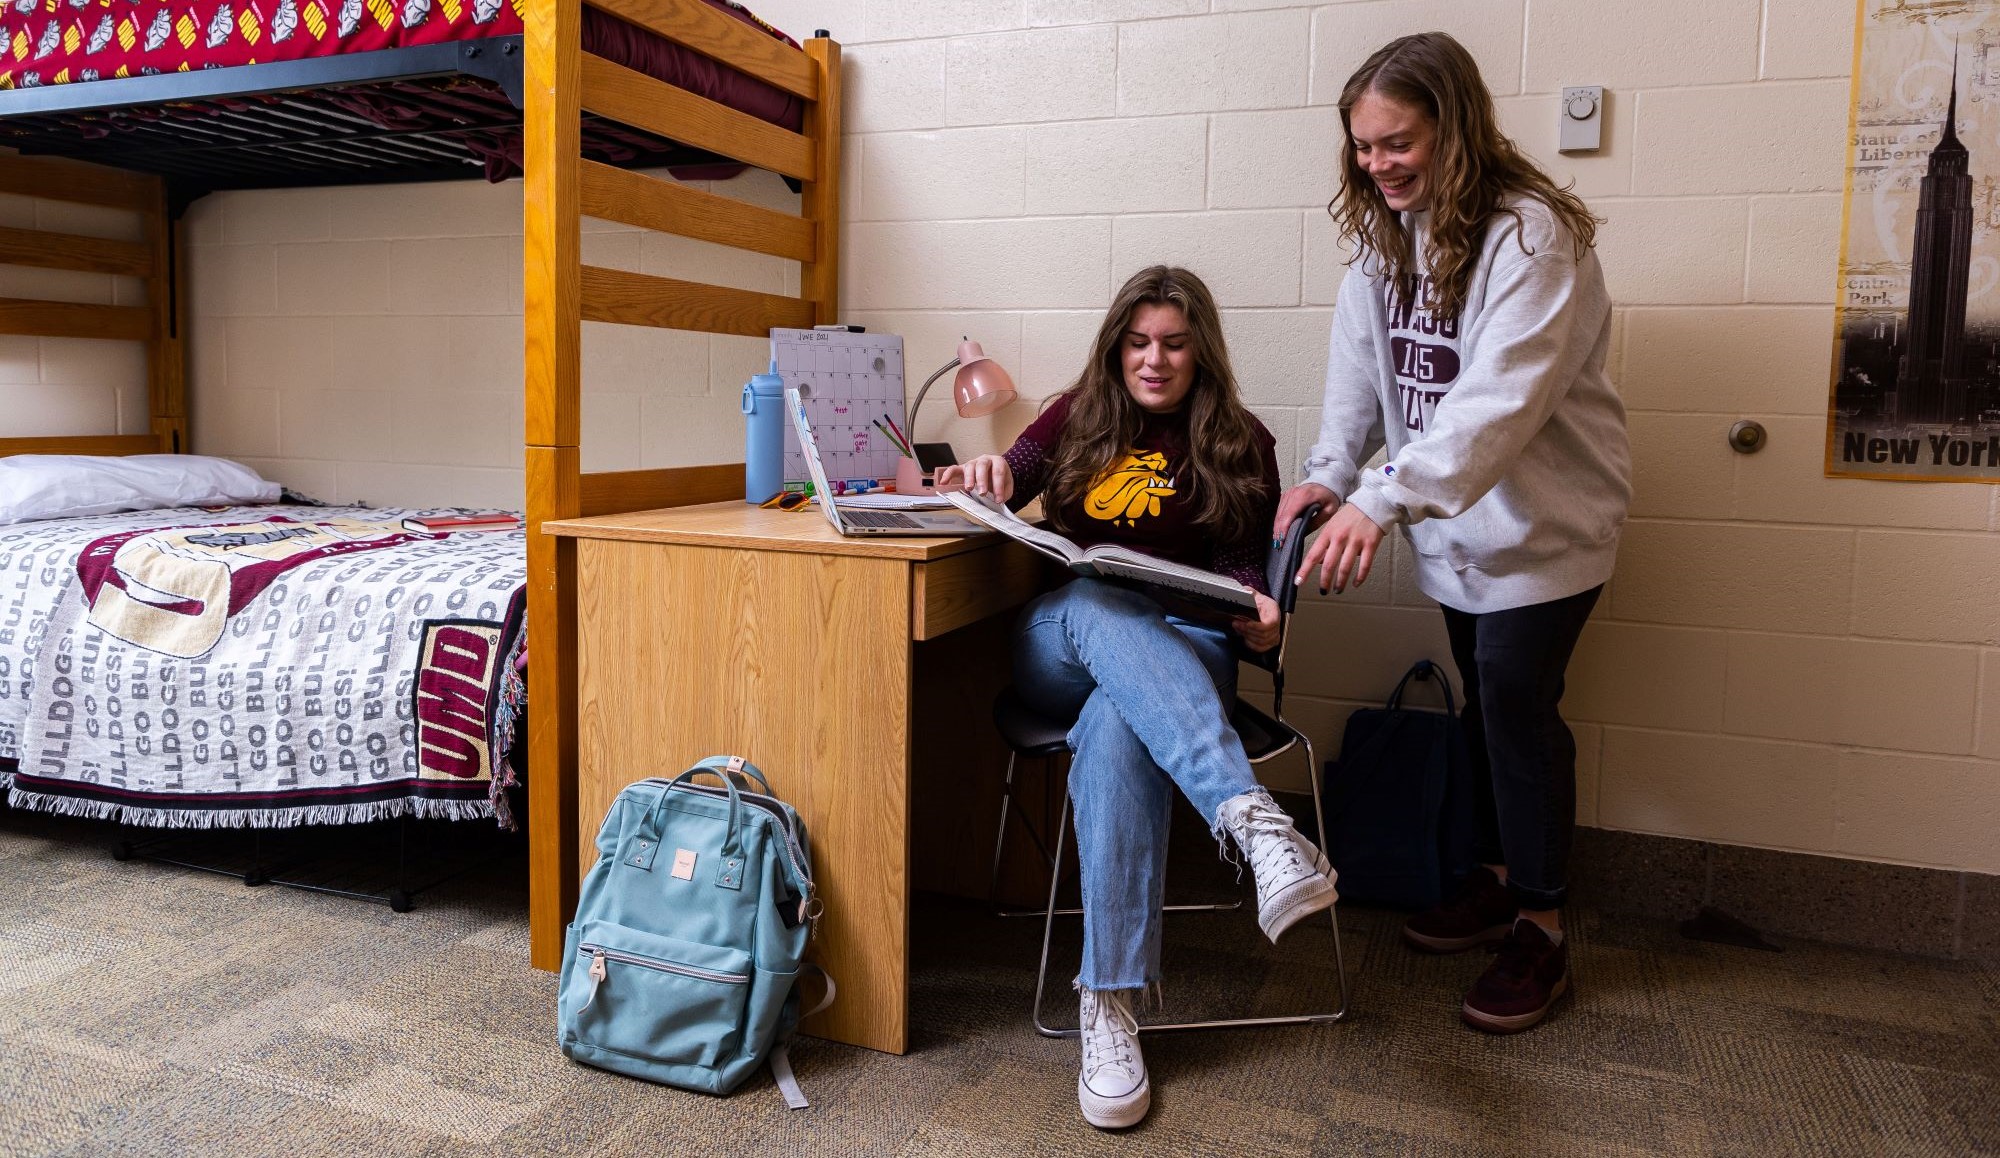 Two students studying in a dorm room with a textbook and a laptop